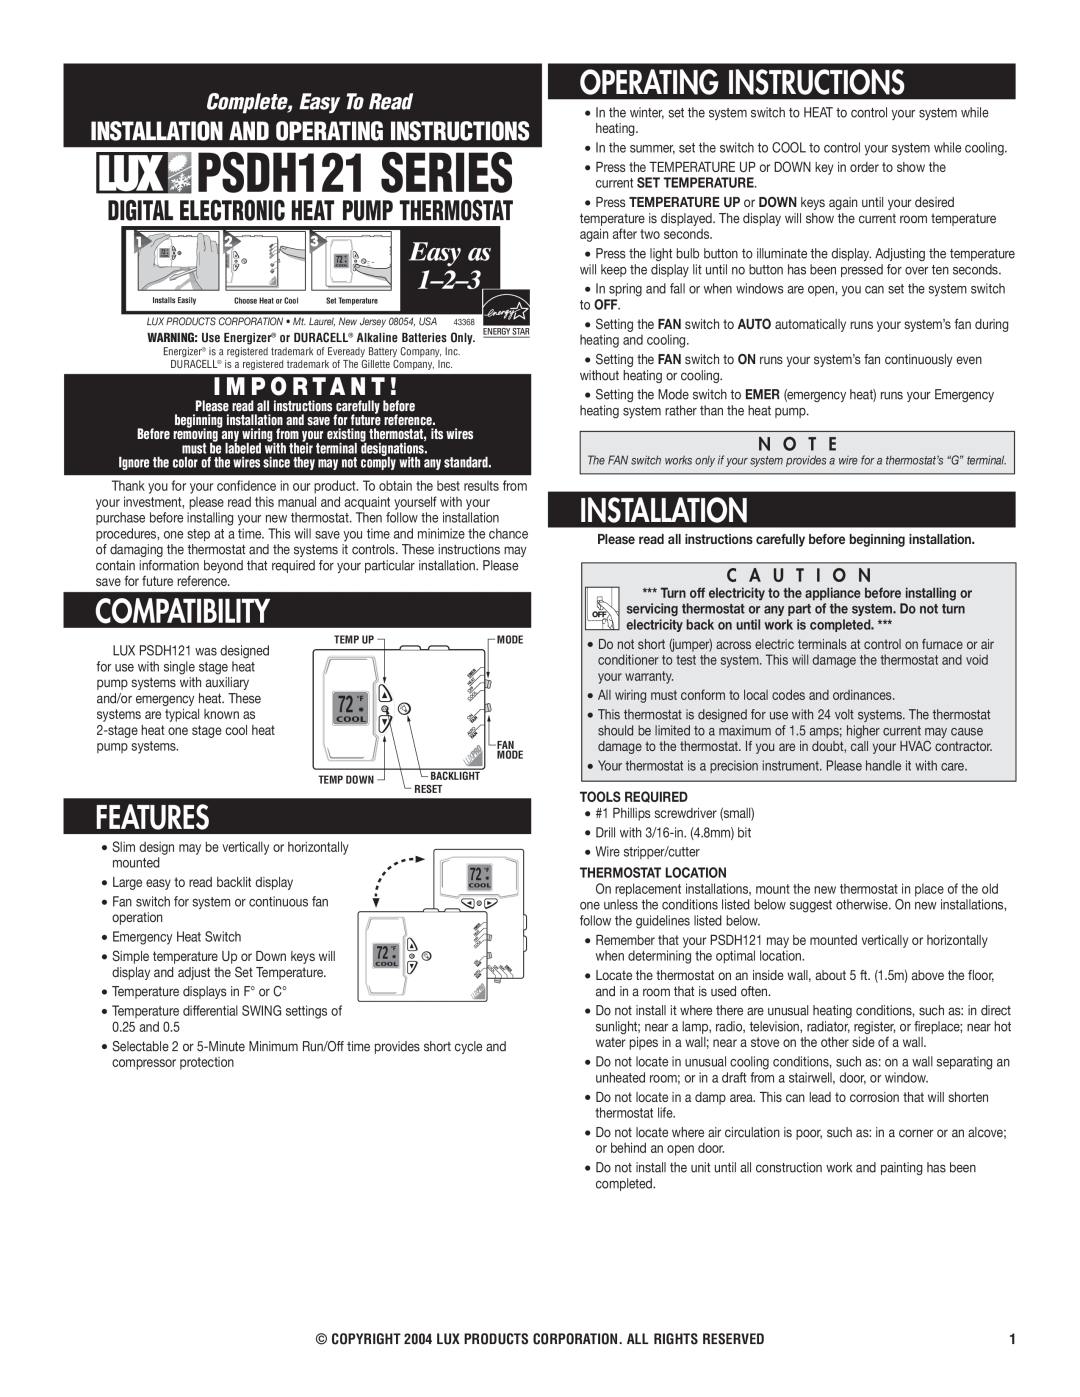 Lux Products PSDH121 warranty Operating Instructions, Installation, Compatibility, Features, N O T E, C A U T I O N, 1-2-3 